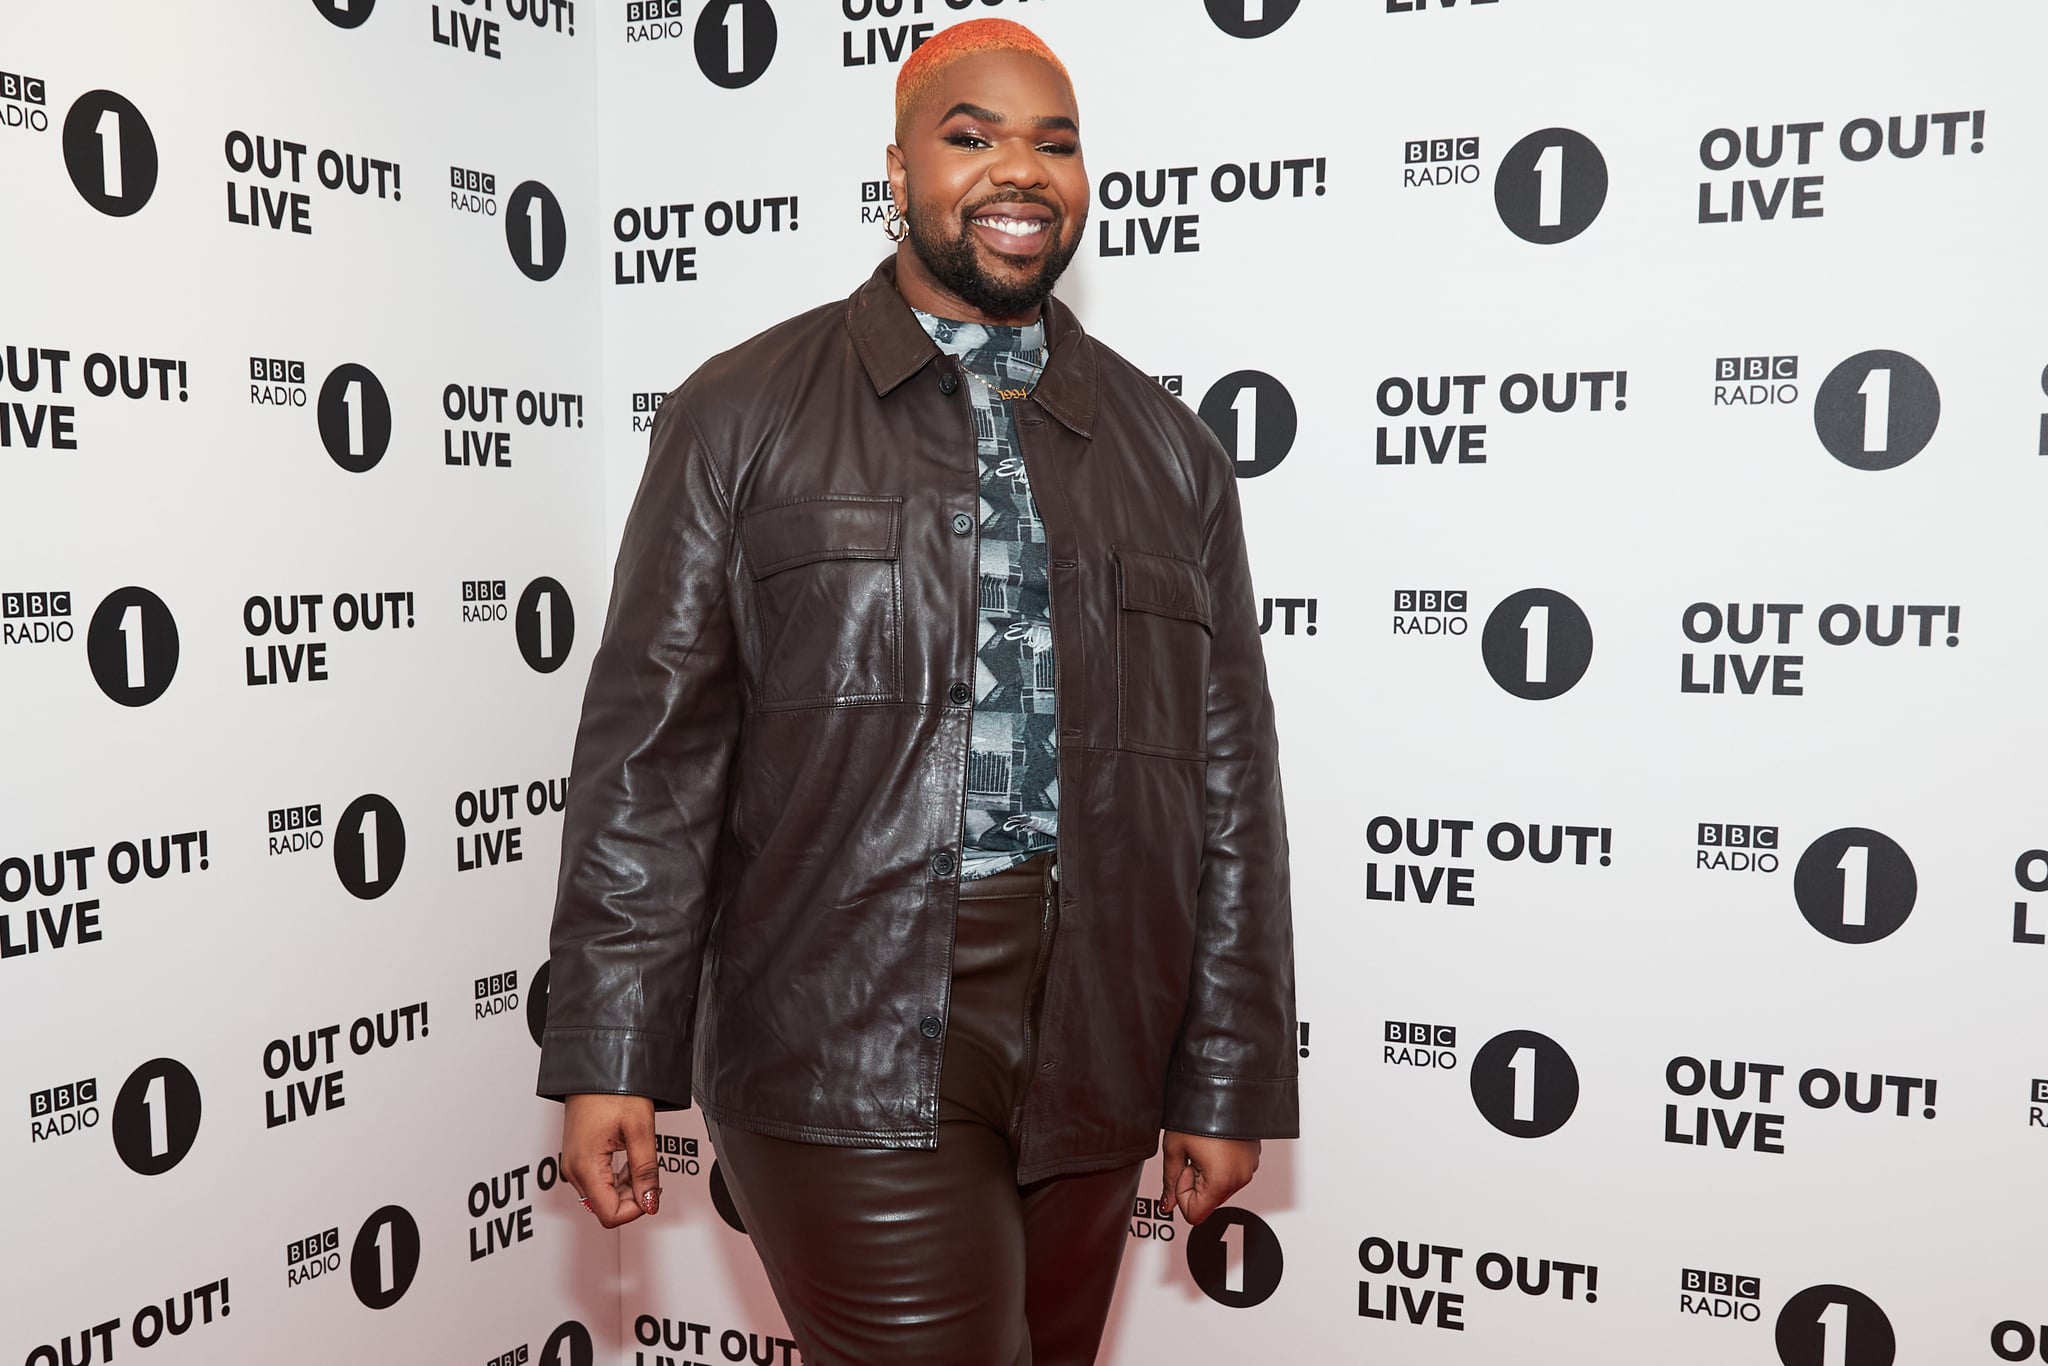 LONDON, ENGLAND - OCTOBER 16: MNEK attends BBC Radio 1 Out Out! Live 2021 at Wembley Arena on October 16, 2021 in London, England. (Photo by Burak Cingi/Redferns)